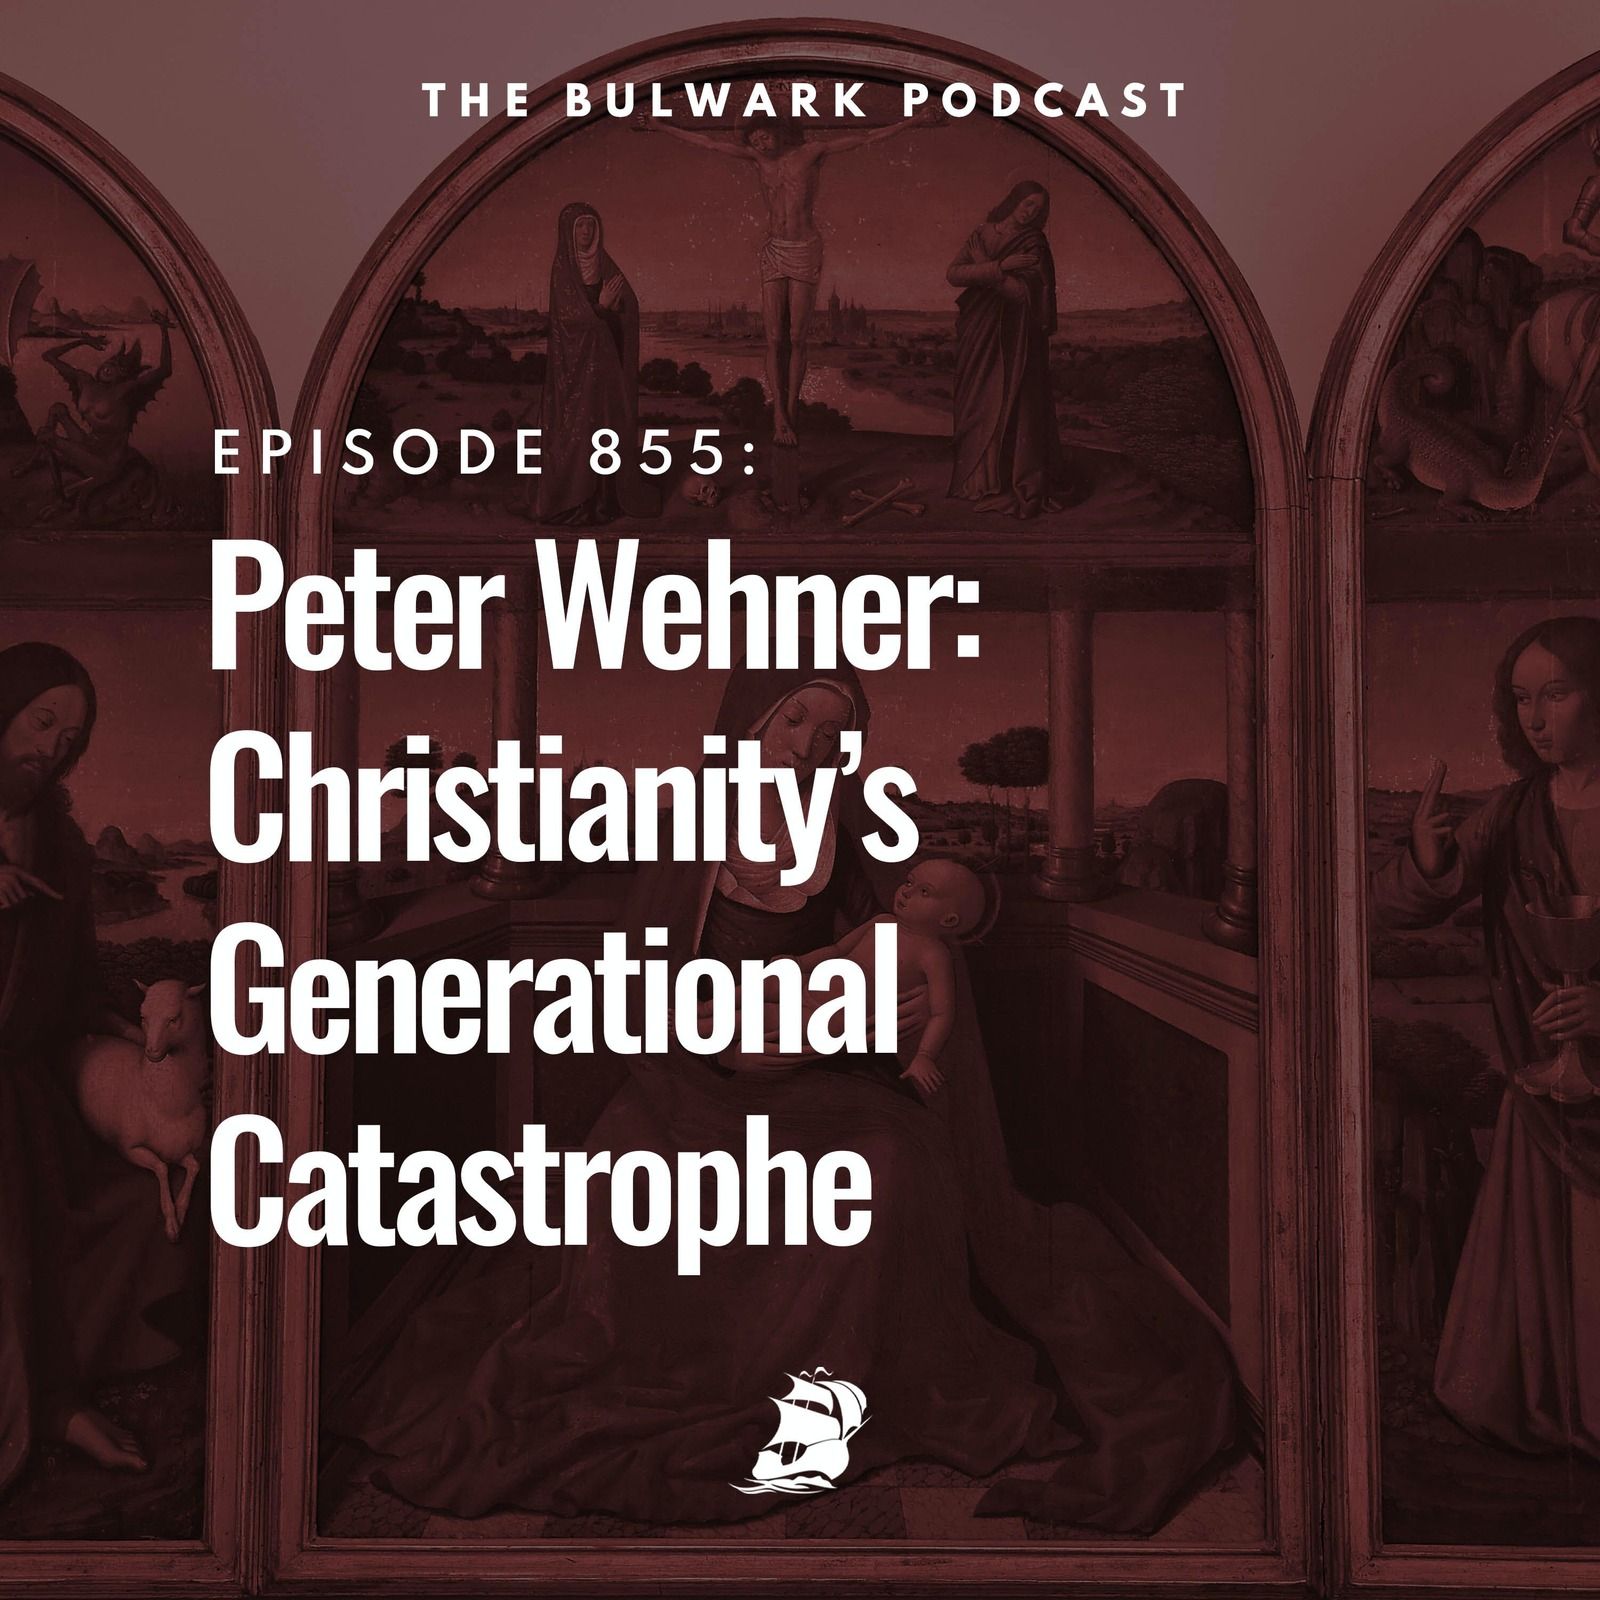 Peter Wehner: Christianity’s Generational Catastrophe